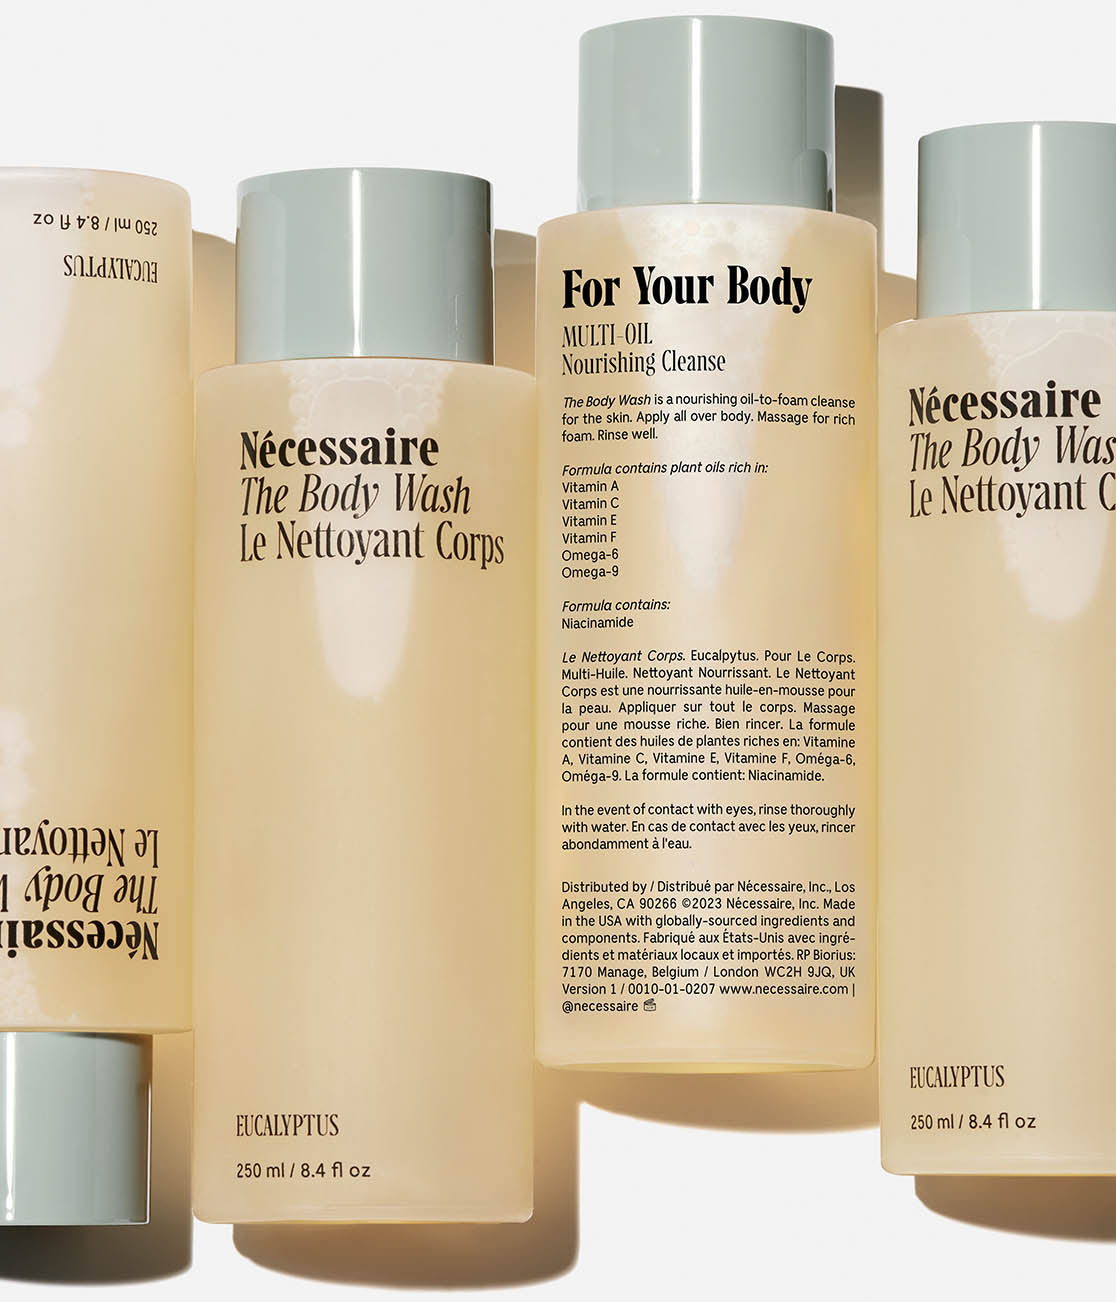 Nécessaire's The Body Wash Turns My Shower Into A Eucalyptus